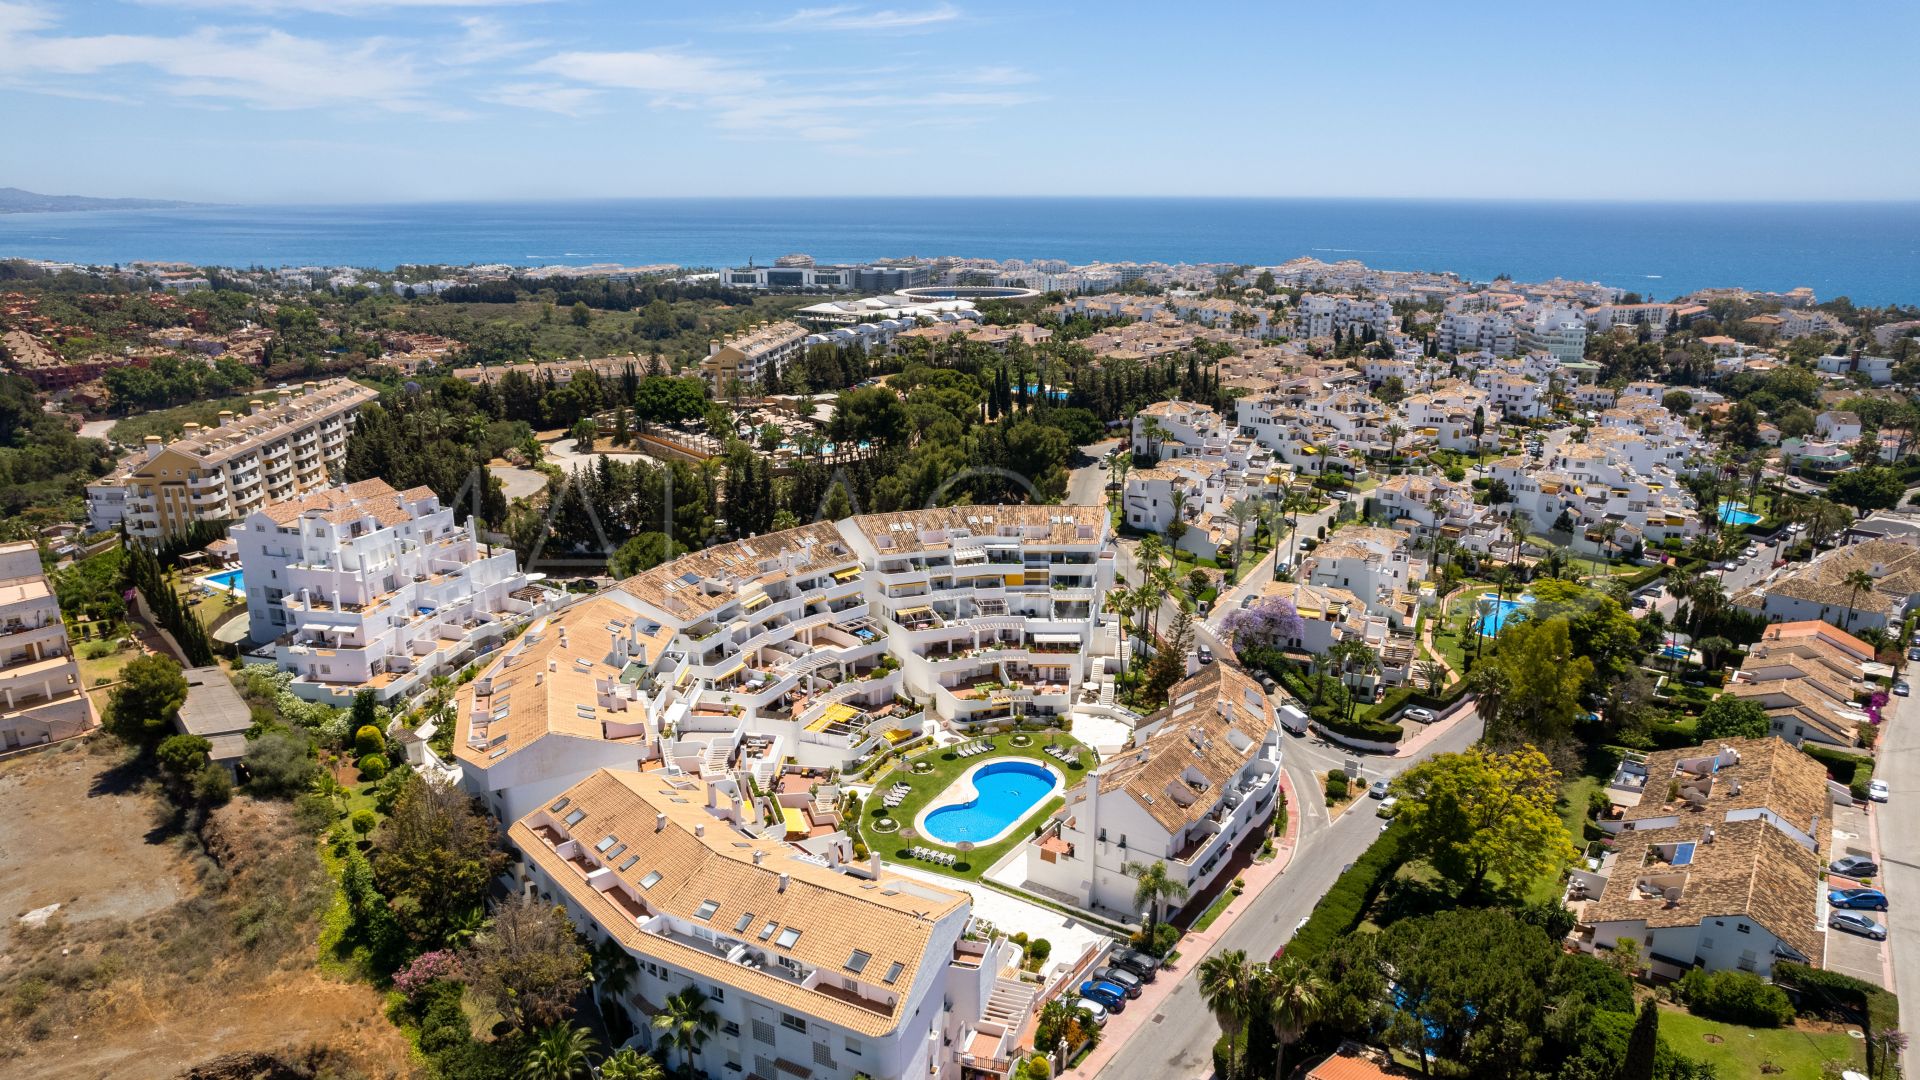 For sale 3 bedrooms duplex penthouse in Nueva Andalucia